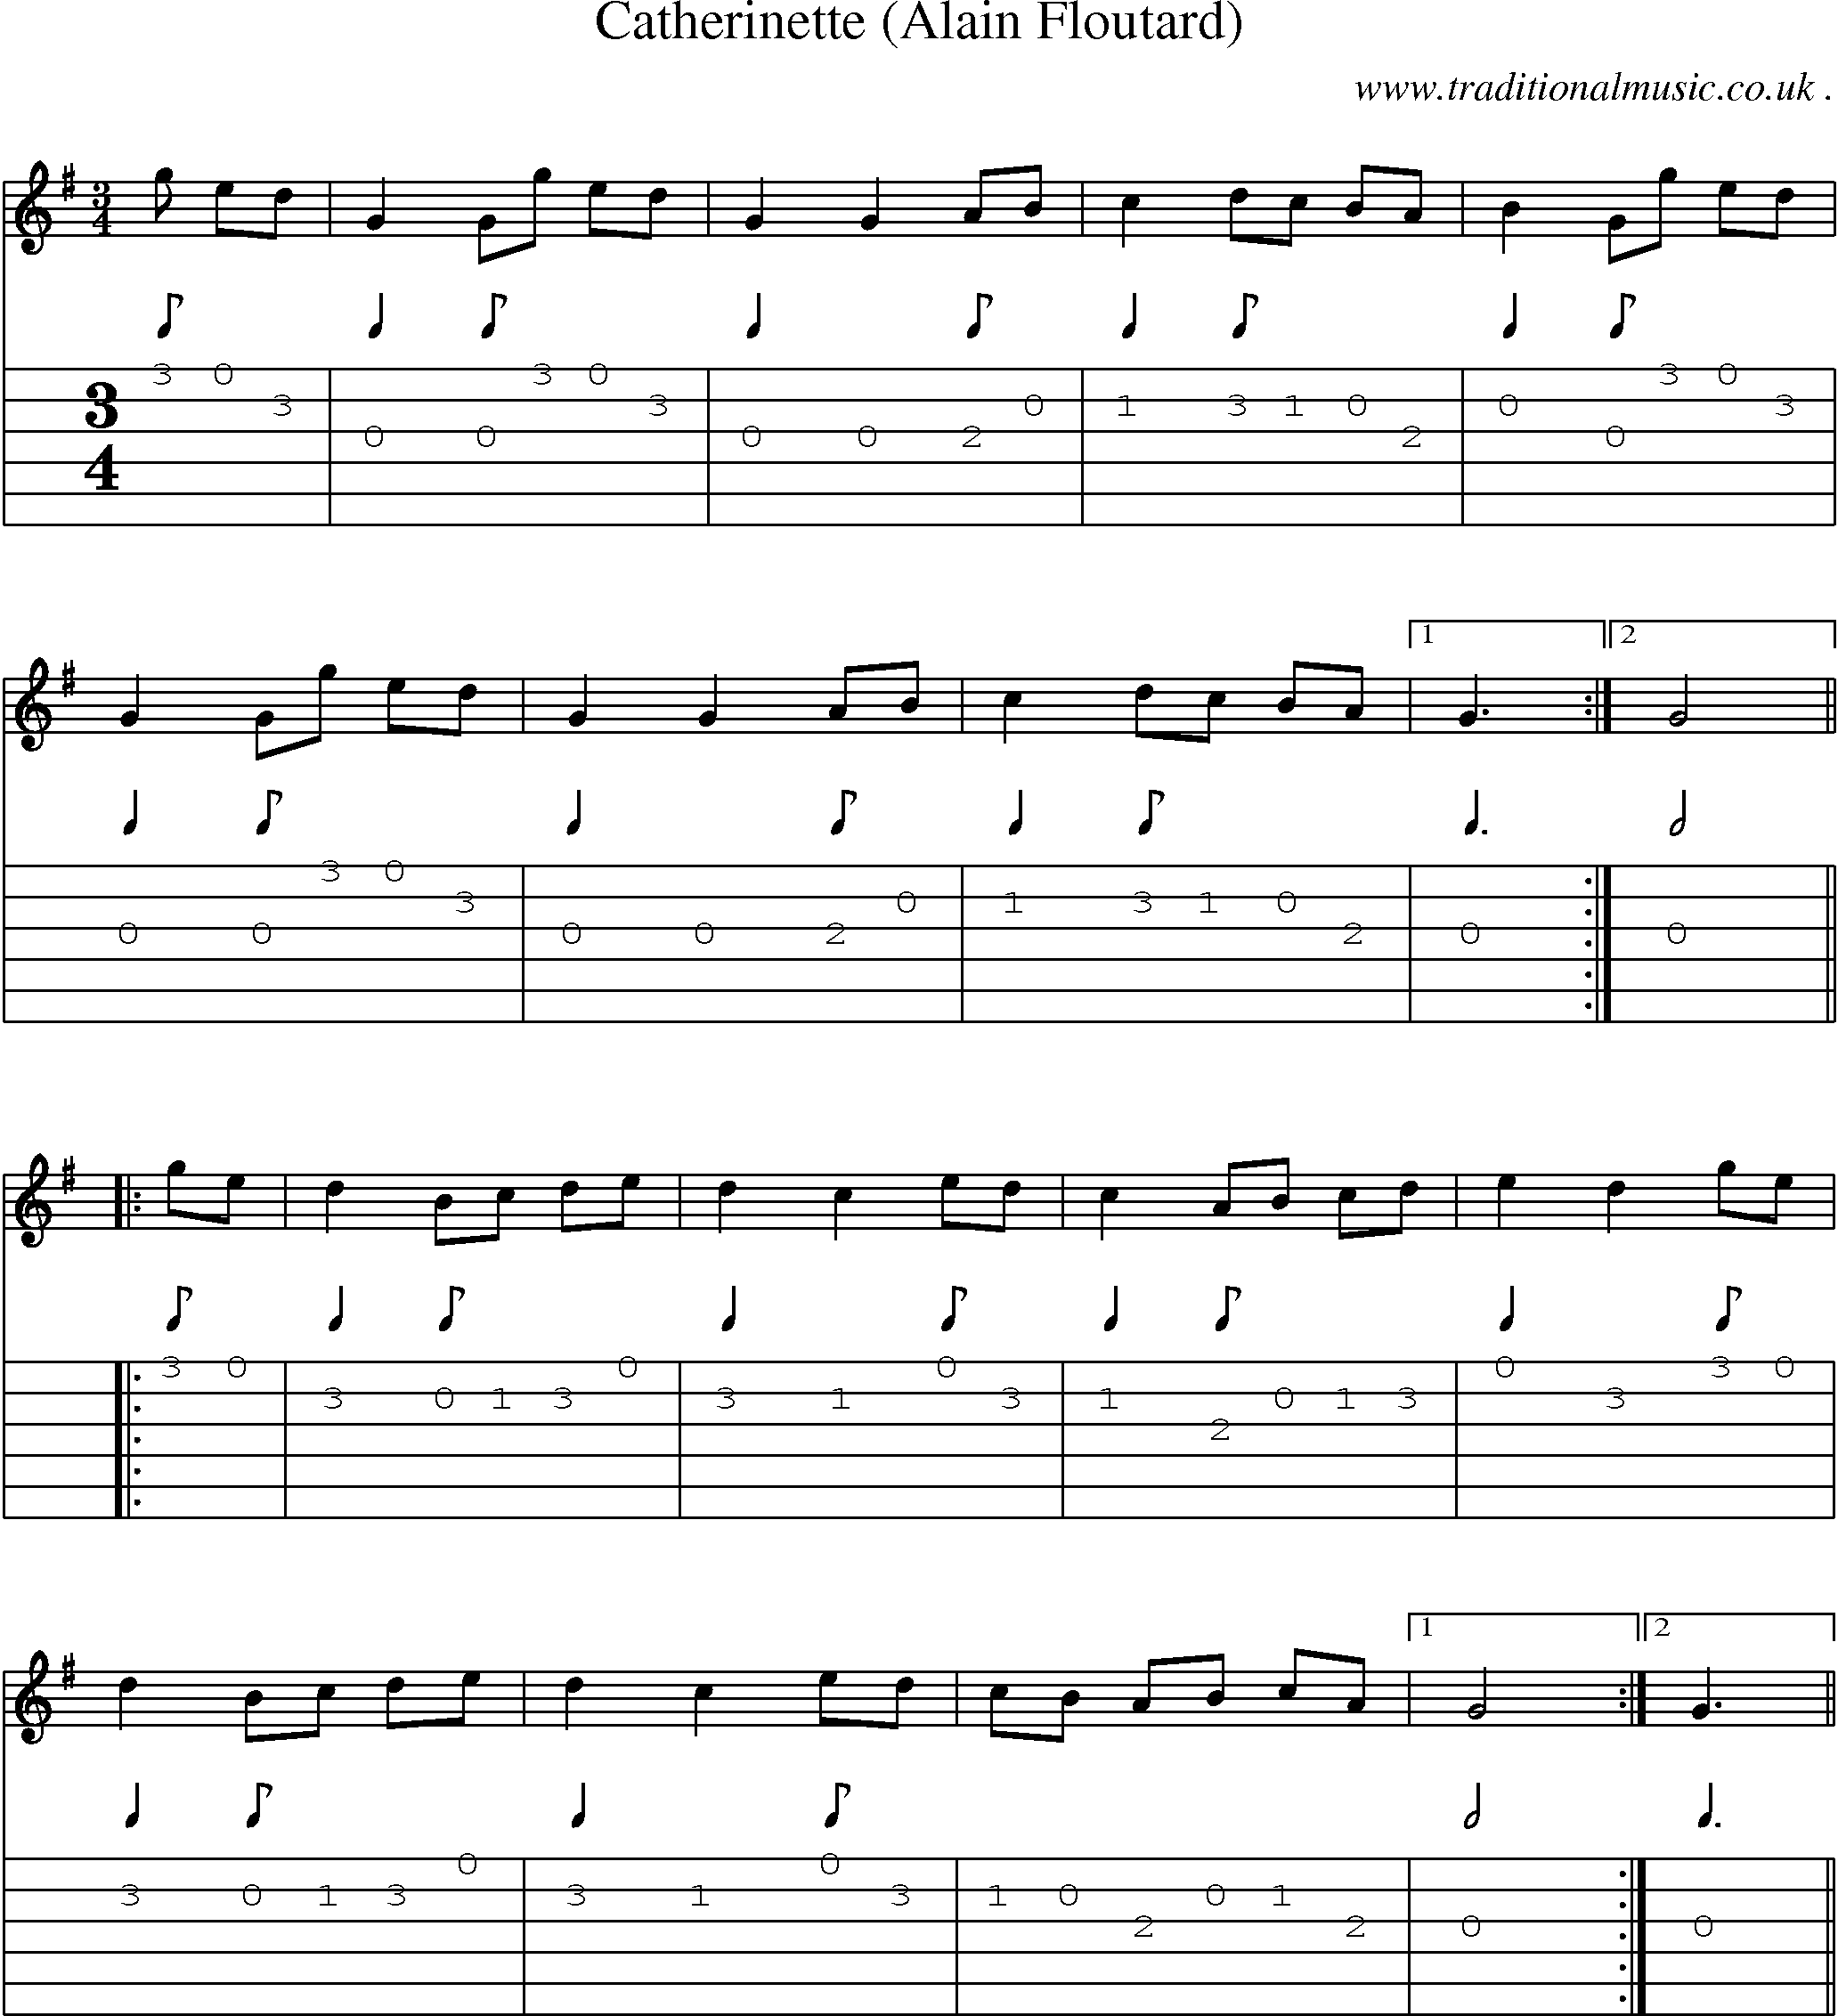 Sheet-Music and Guitar Tabs for Catherinette (alain Floutard)